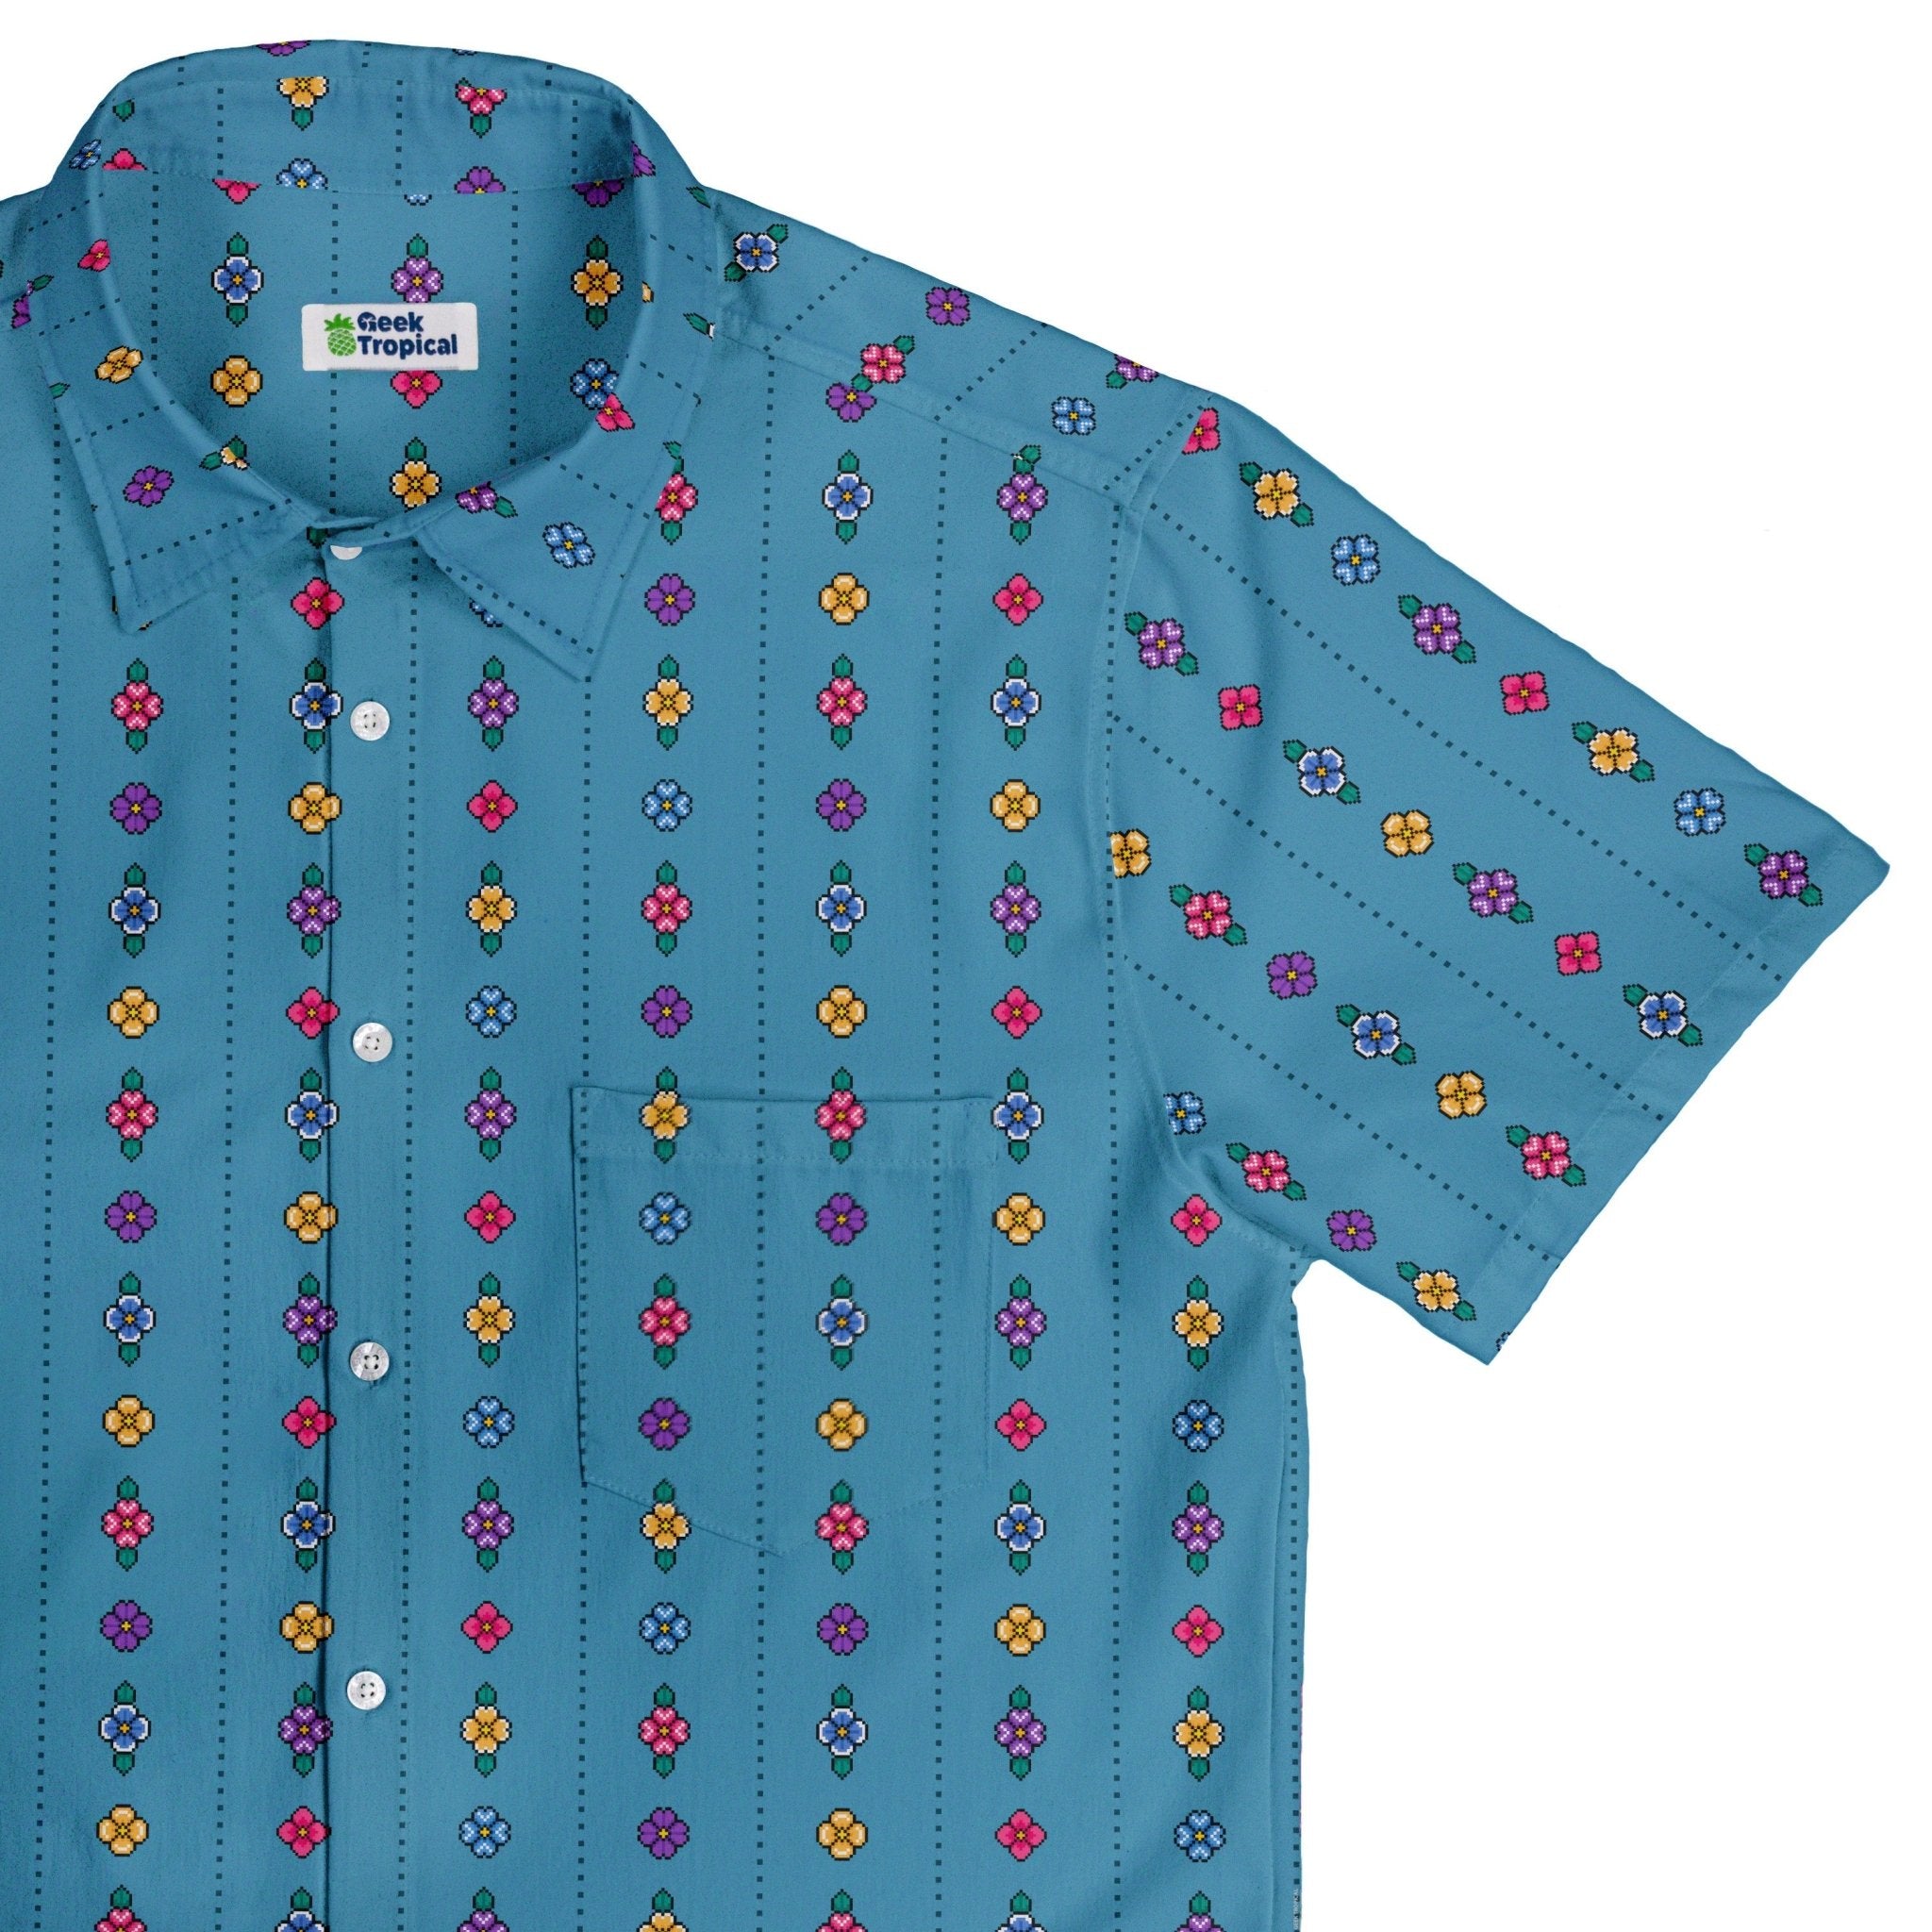 Arcade Pixel Flowers Button Up Shirt - adult sizing - Design by Dunking Toast - Simple Patterns